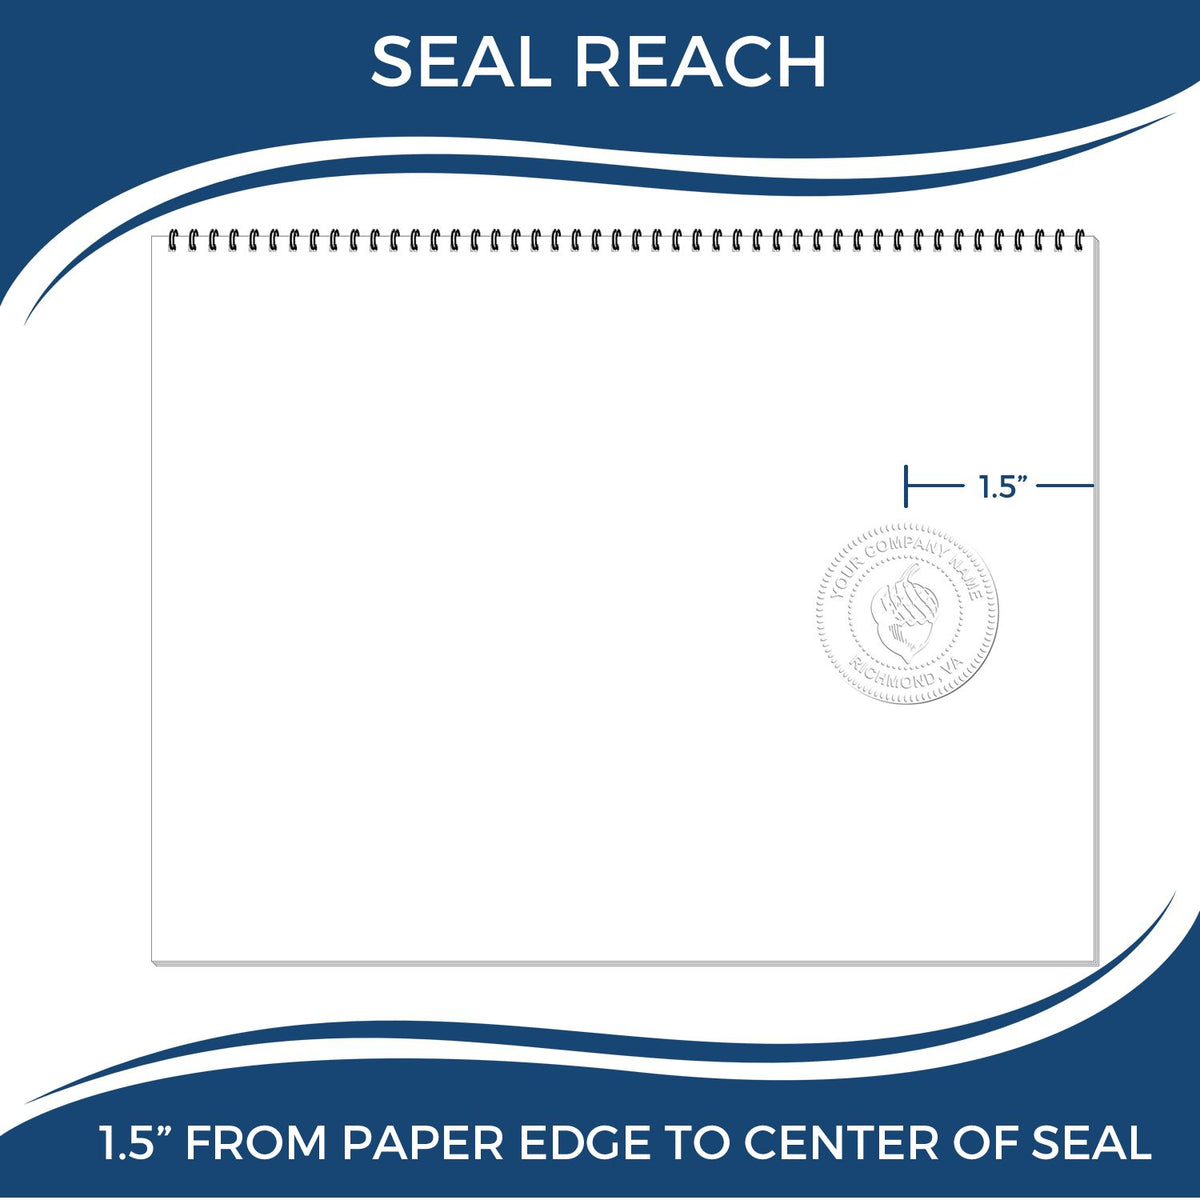 An infographic showing the seal reach which is represented by a ruler and a miniature seal image of the Gift New Mexico Land Surveyor Seal